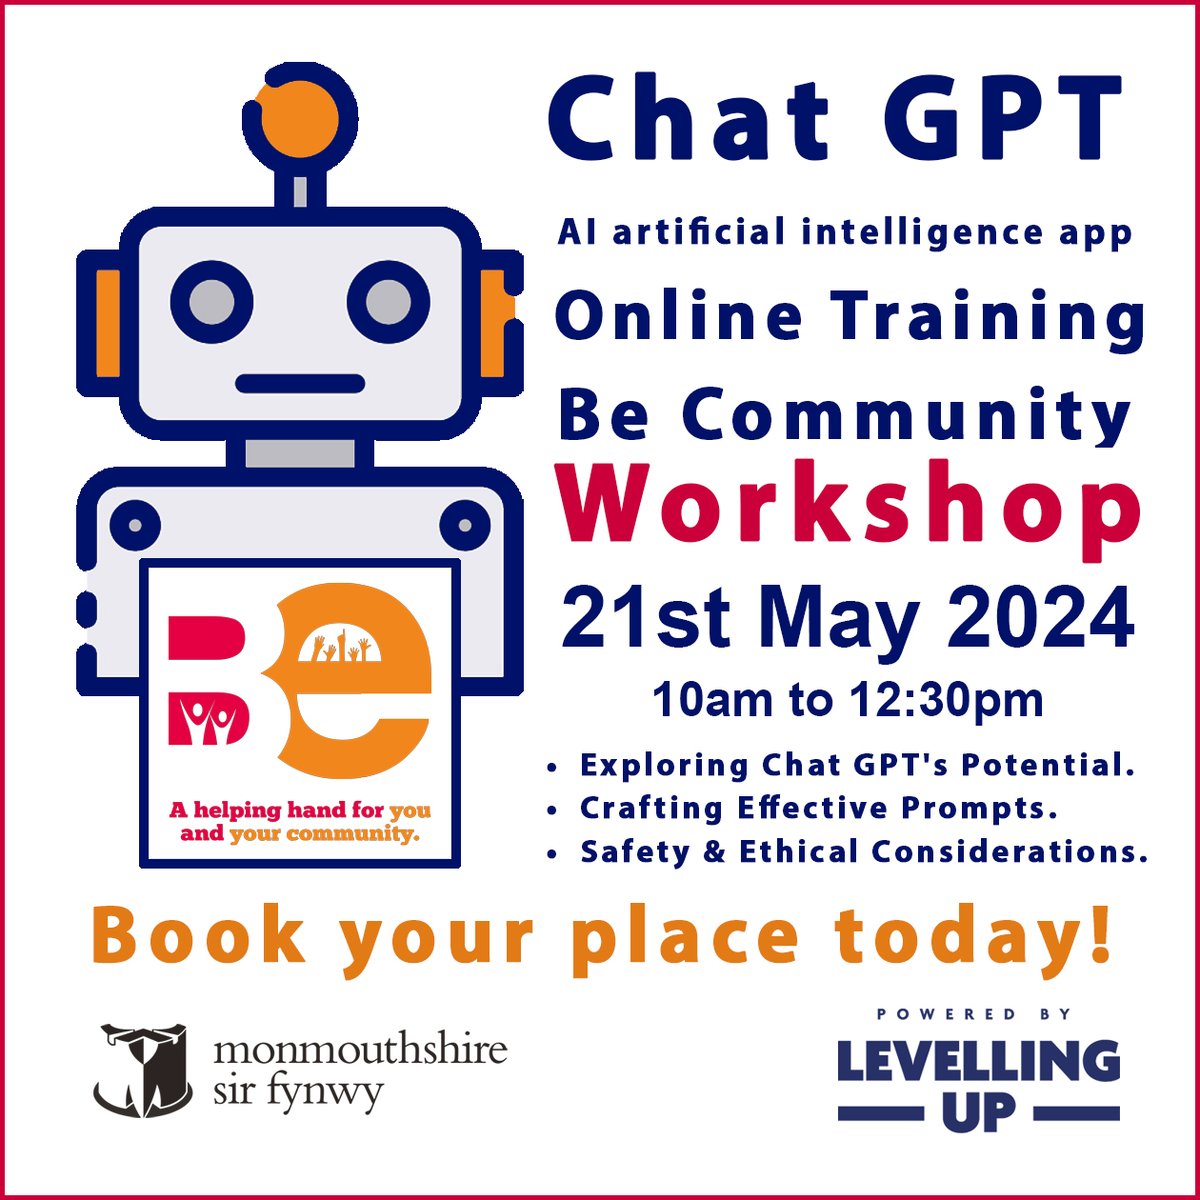 MCC Community Development Team are pleased to present Chat GPT (AI artificial intelligence app) online training workshop for 21st May, 10am to 12:30pm.💻 Our registration form is LIVE! Book your place today forms.office.com/e/neSQD3dBcS #BeCommunity #LevellingUp #UKSPF